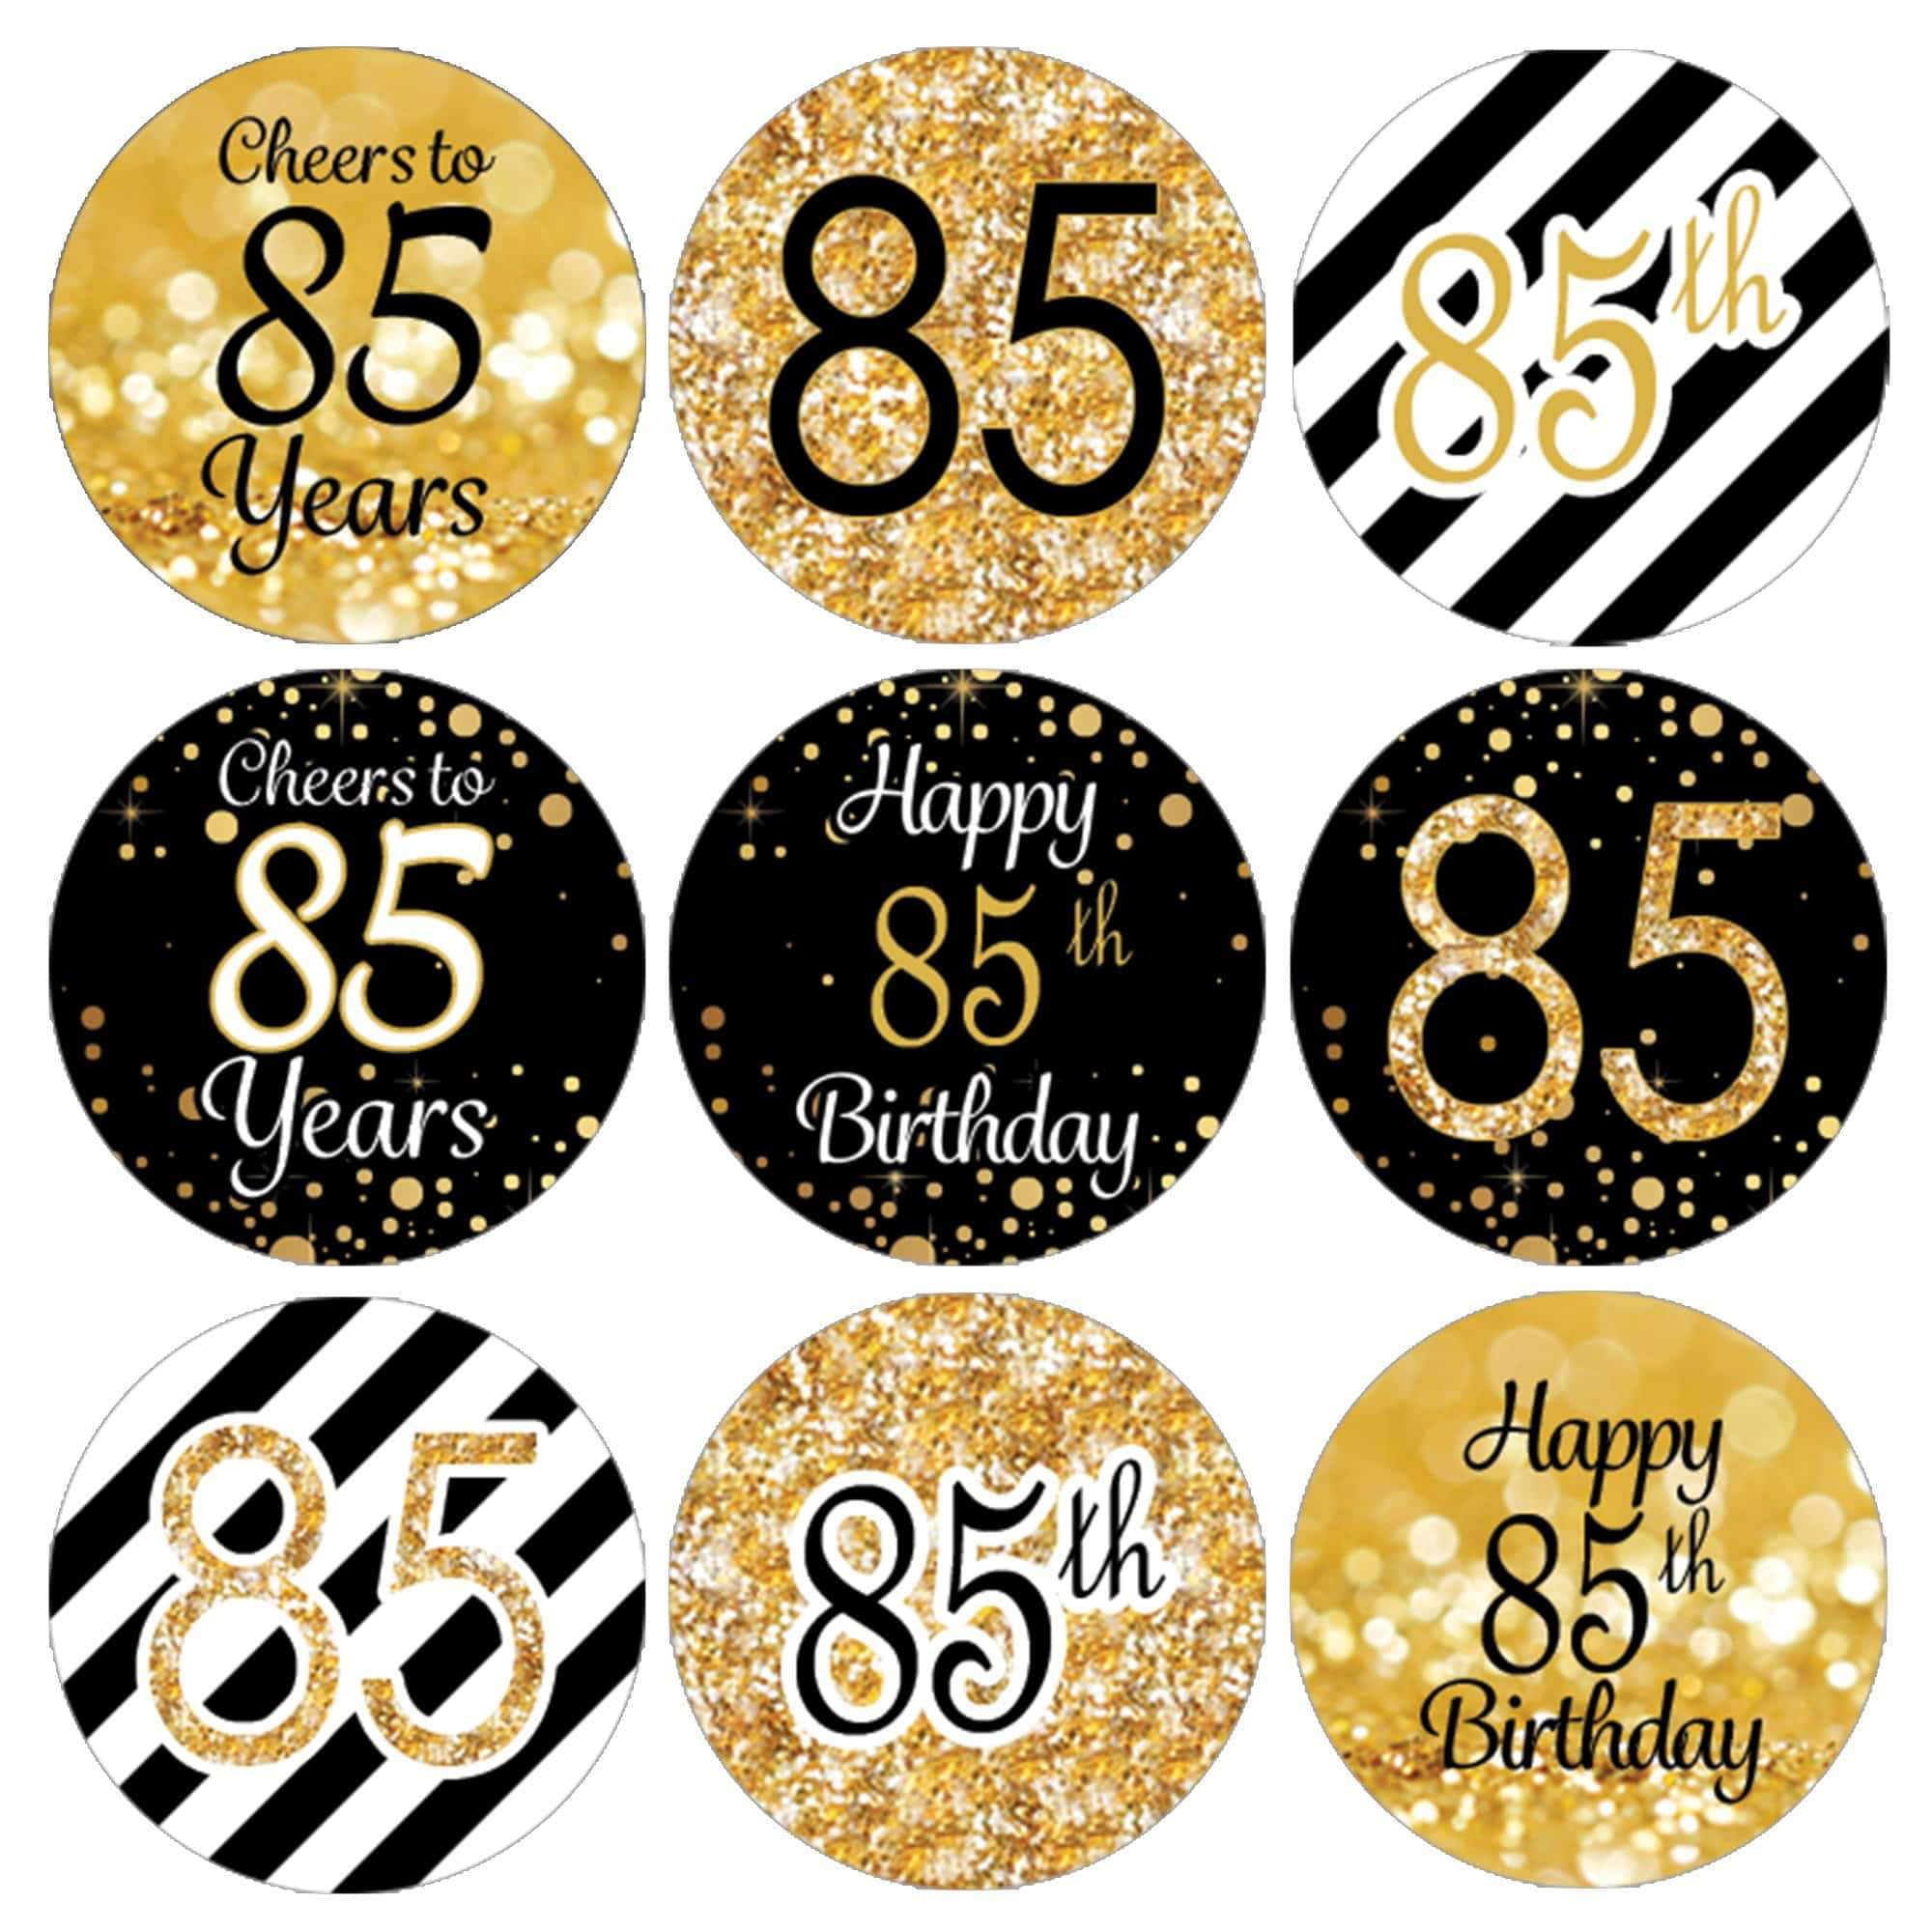 Birthday Gift Happy 80th Birthday Celebrate Party. Mugs Vinyl Sticker Decal Labels for Glasses